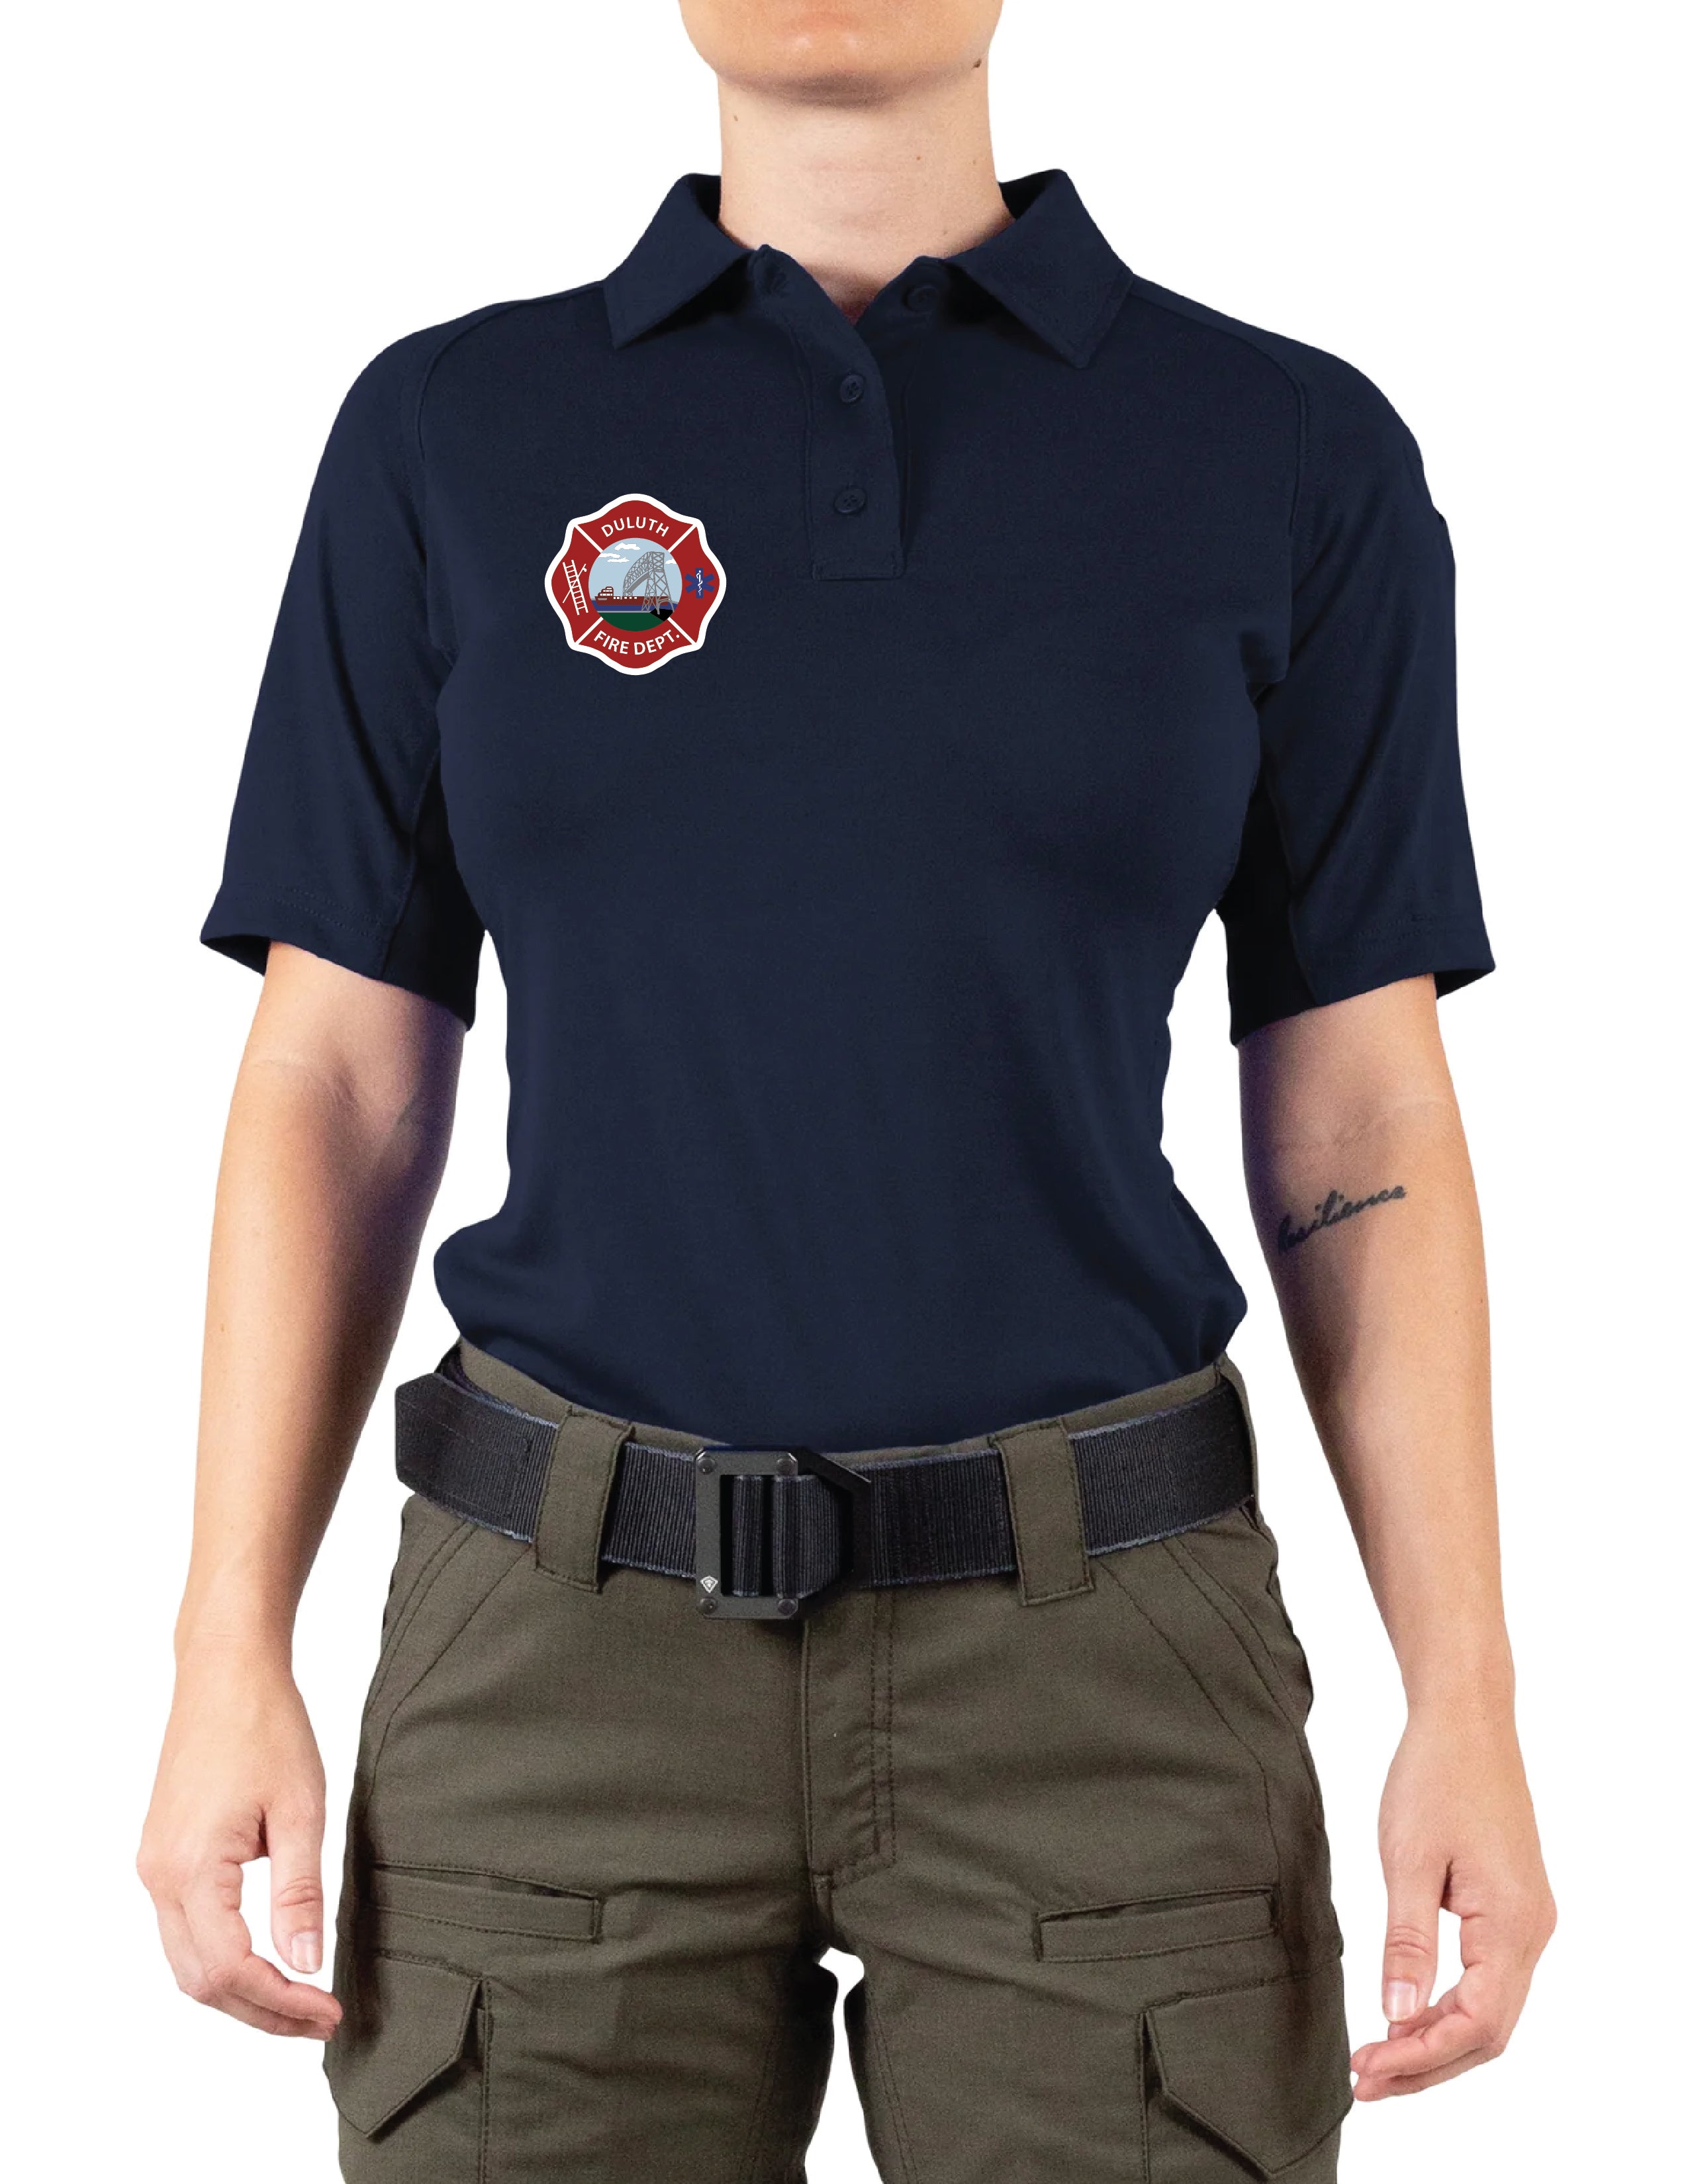 G) #122509 FIRST TACTICAL WOMEN'S PERFORMANCE SHORT SLEEVE POLO